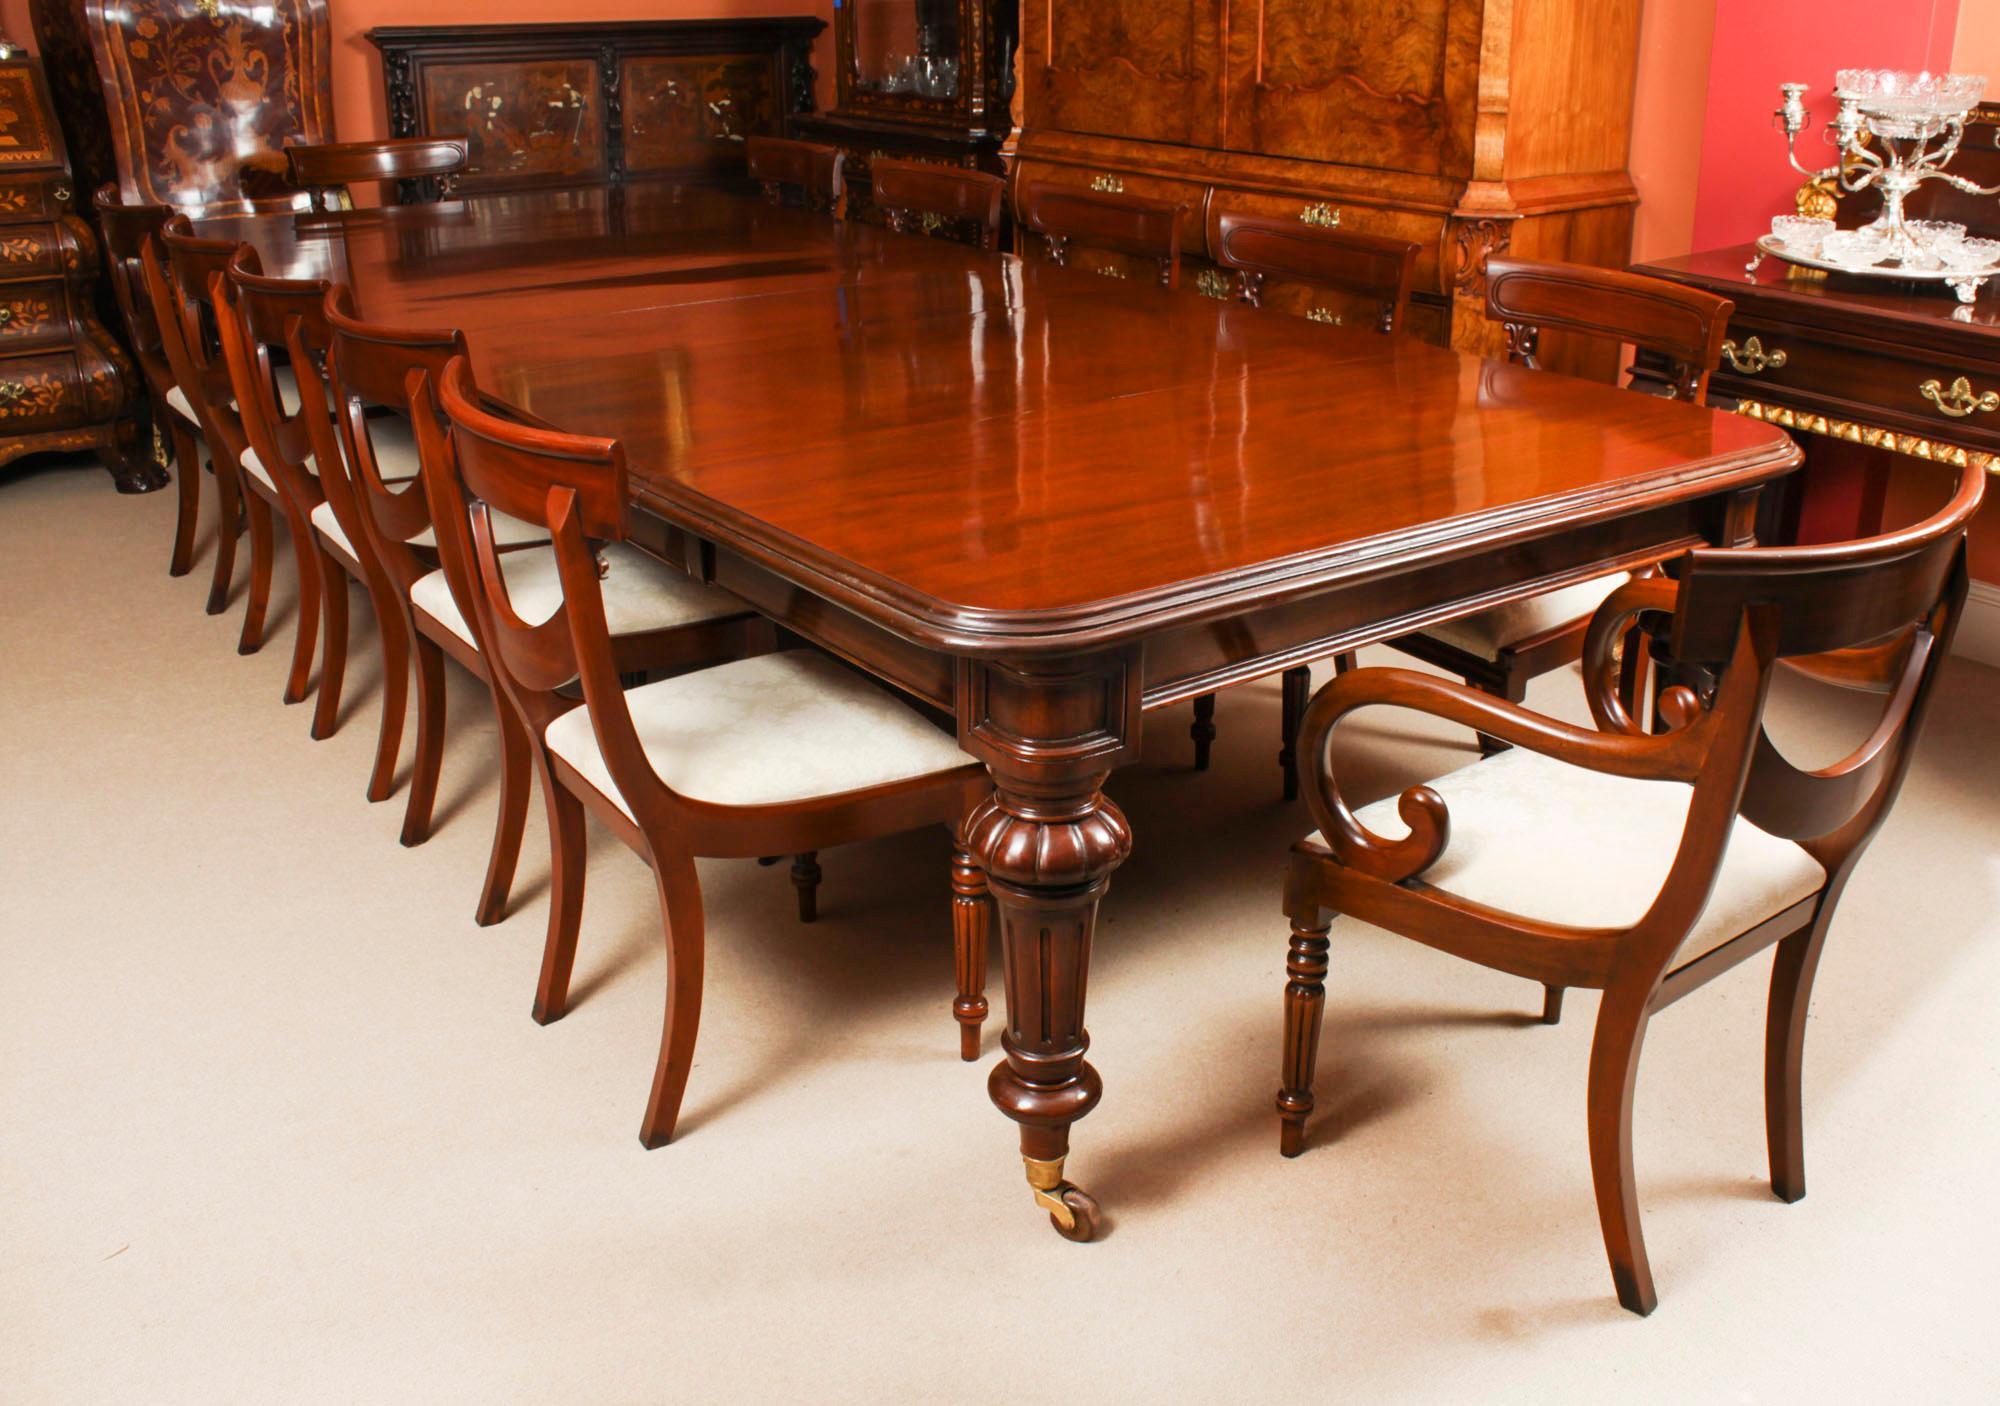 This is a beautiful antique William IV  flame mahogany extending dining table, circa 1835 in date.
 
This amazing table can  seat  fourteen people in comfort and has been hand-crafted from beautiful solid flame mahogany.
 
The beautifully figured